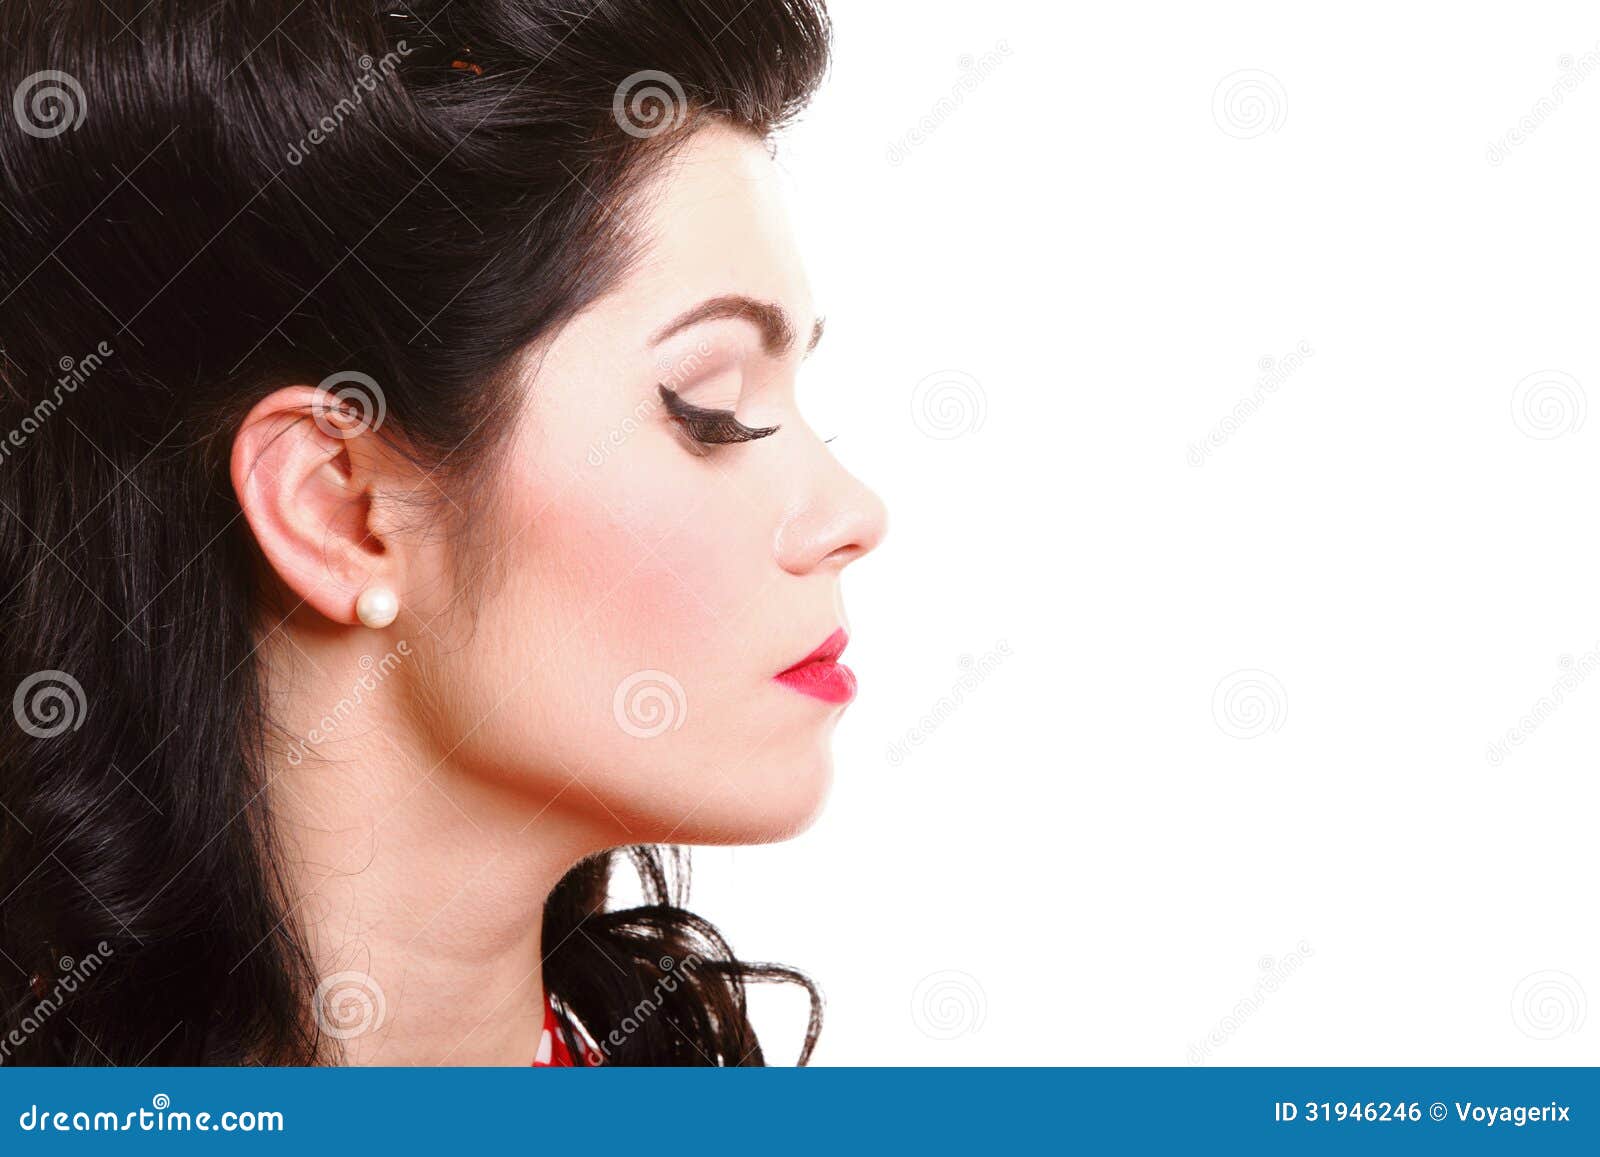 Profile, Pin-up Girl Make-up and Vintage Hairstyle Stock Photo - Image of  background, girl: 31946246